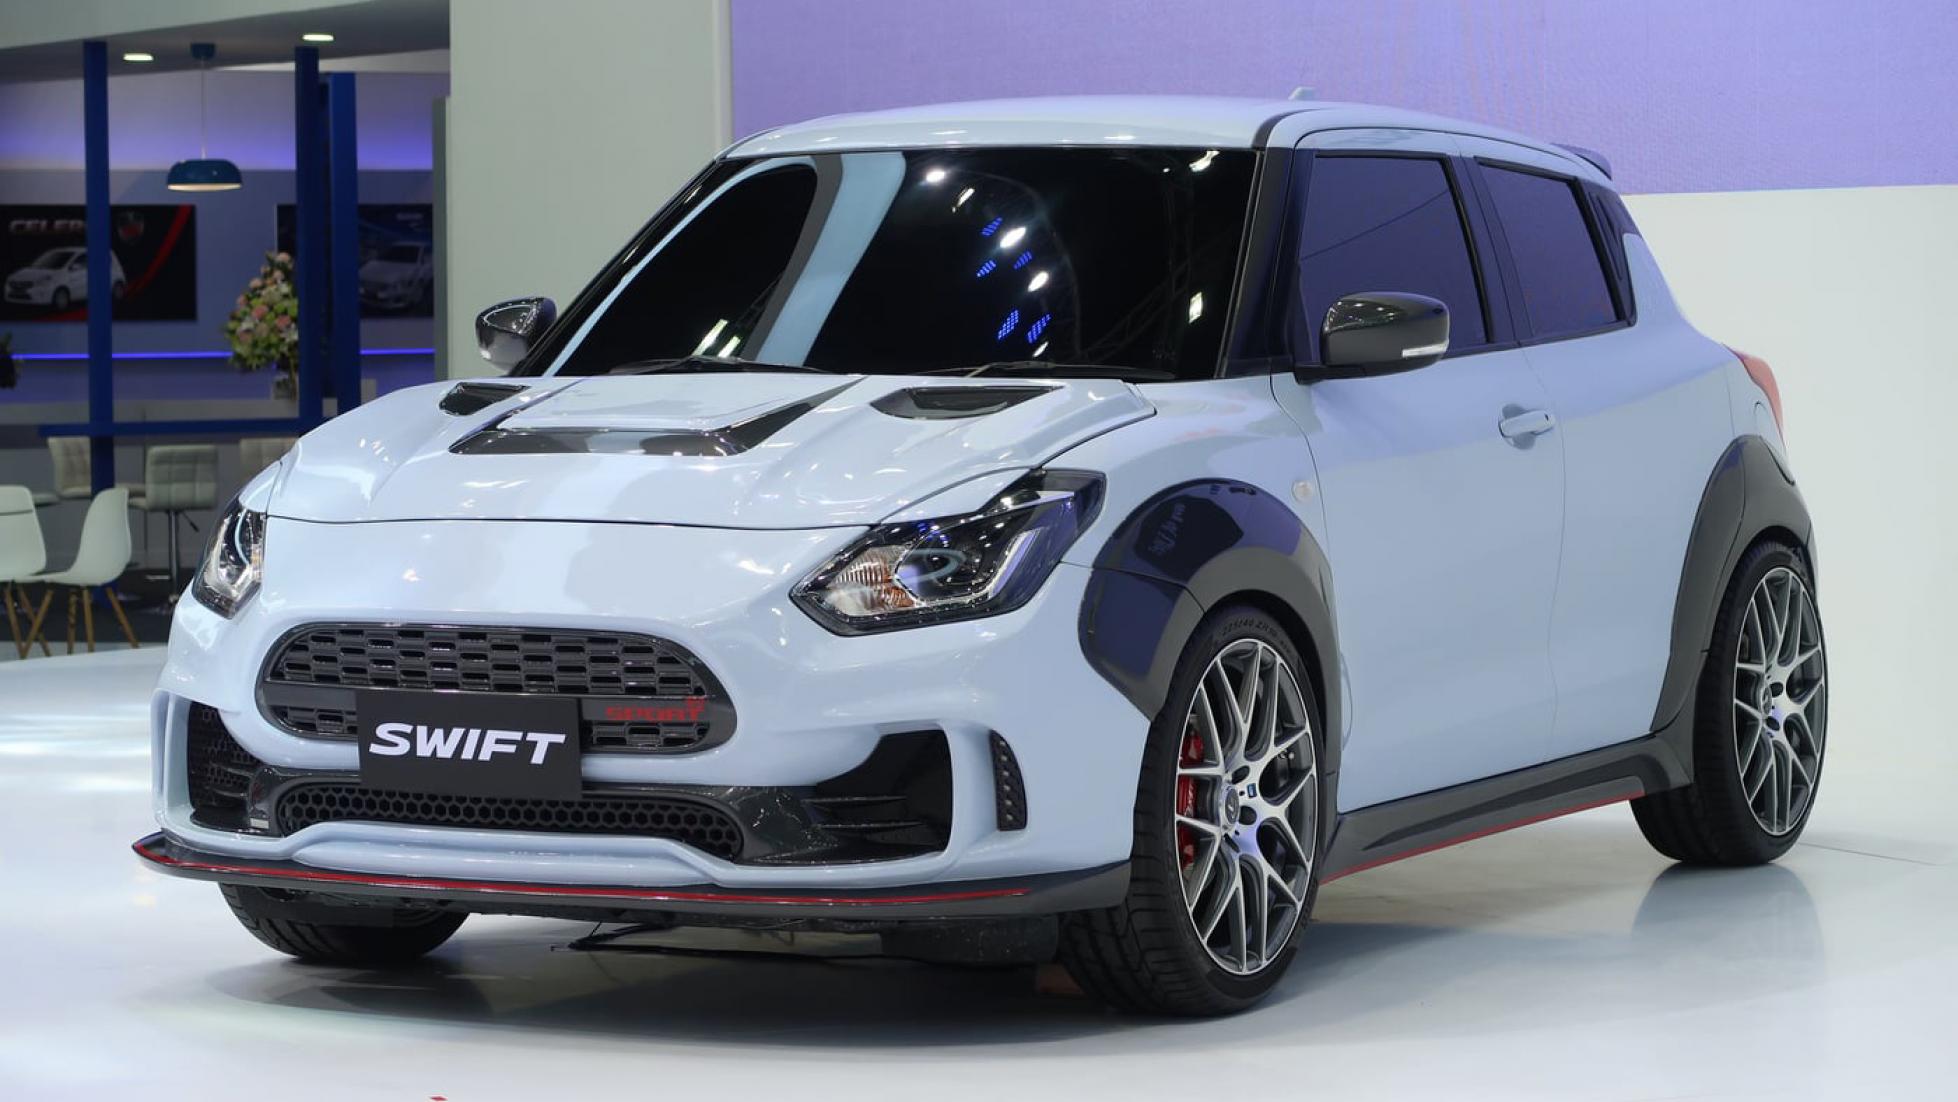 This is the fantastically bonkers Suzuki Swift Sport Extreme